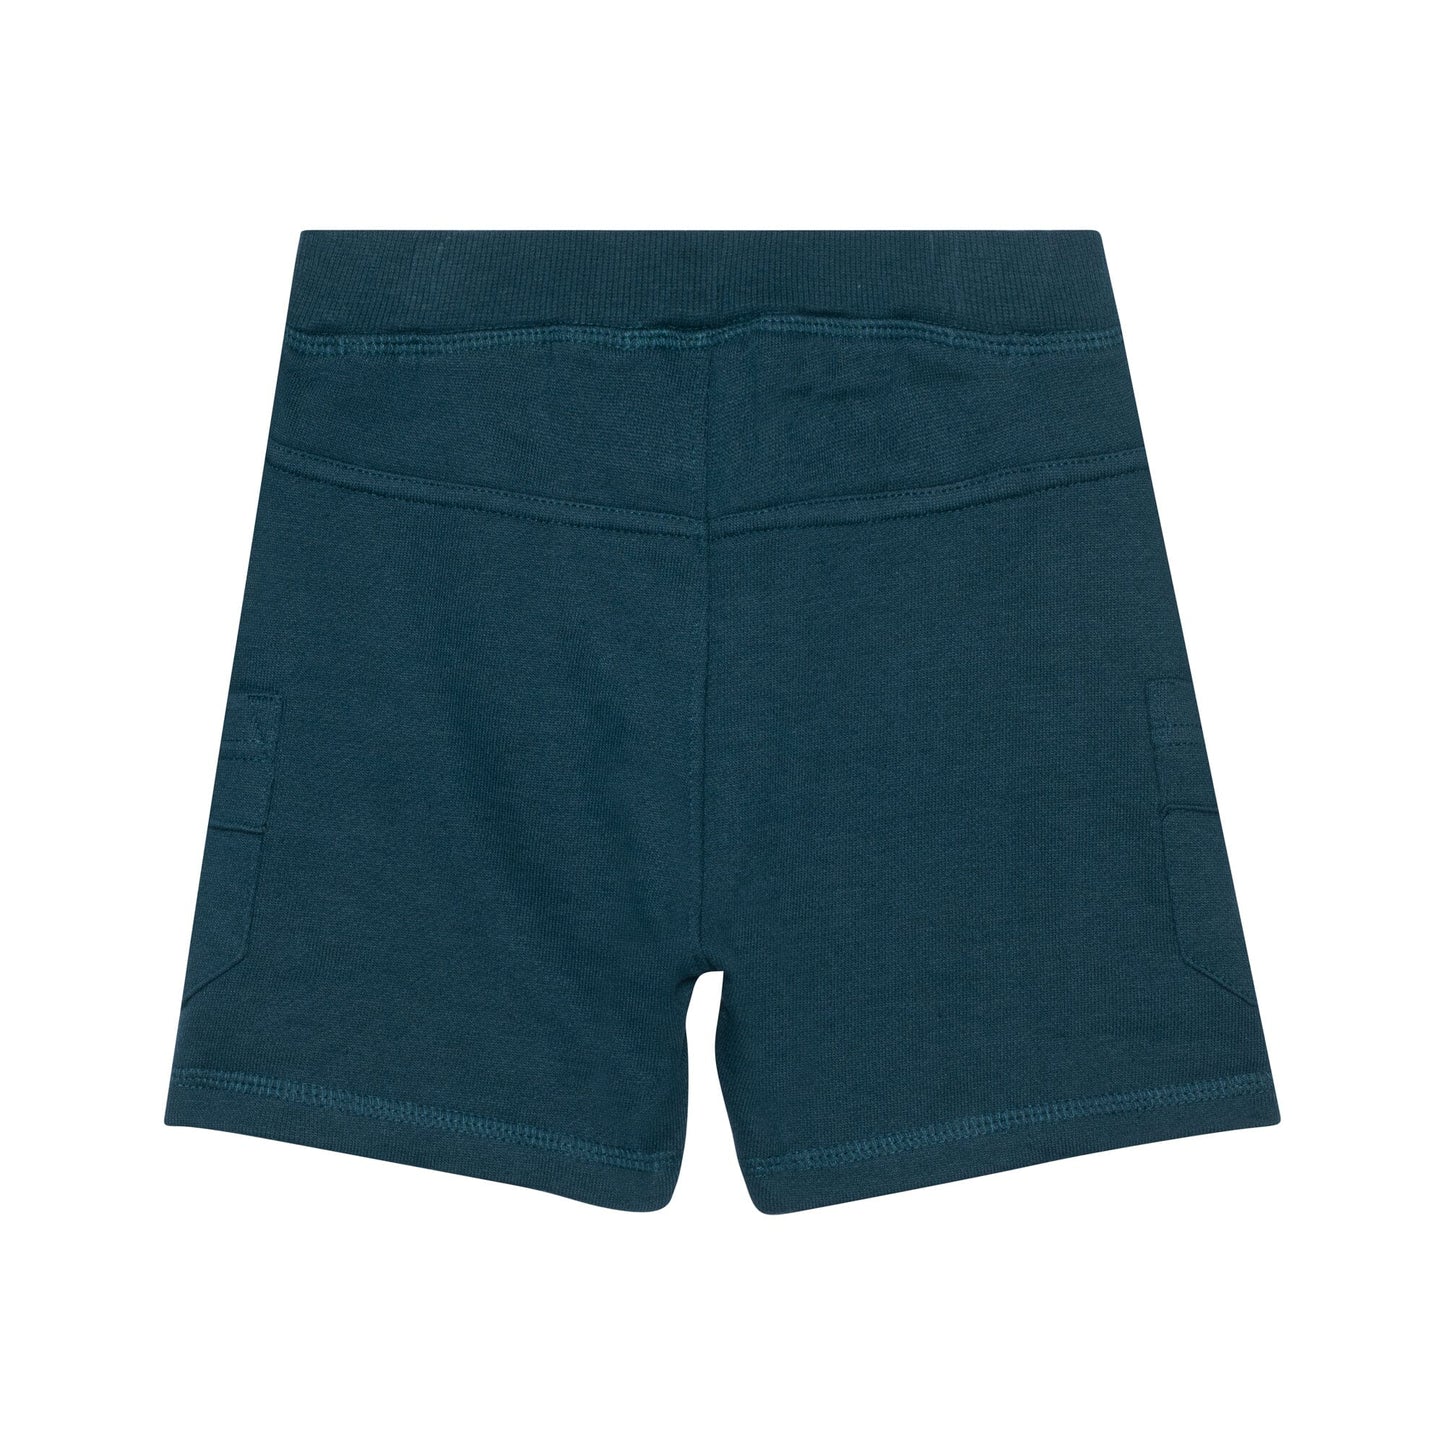 French Terry Short Dark Teal With Pockets - E30T25_379